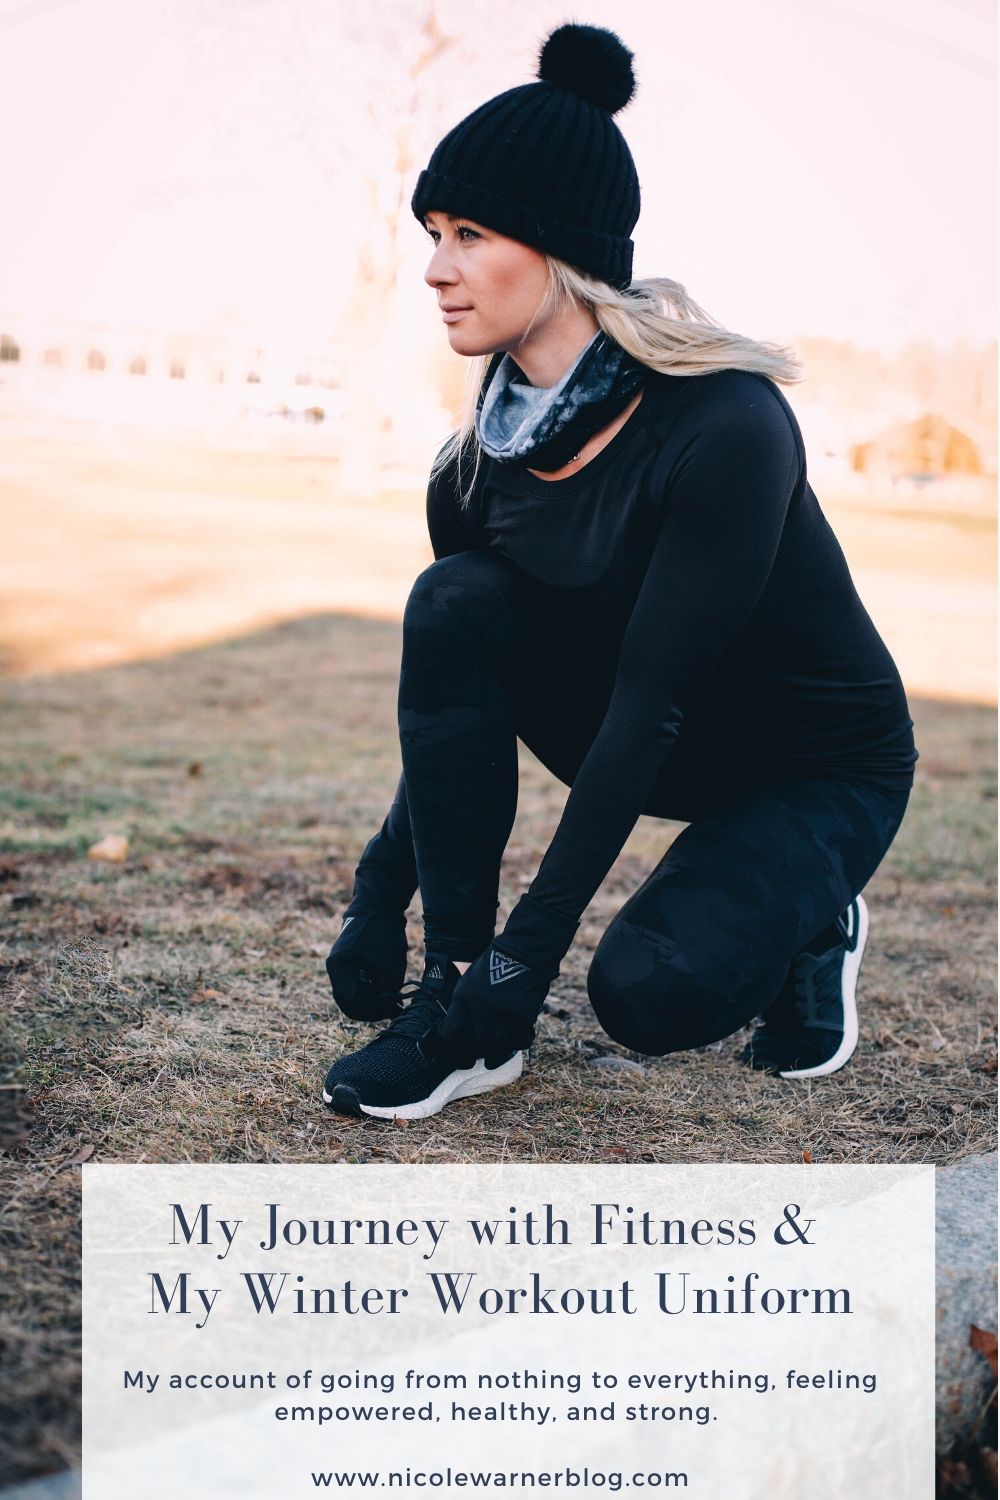 My Journey with Fitness & My Winter Workout Uniform